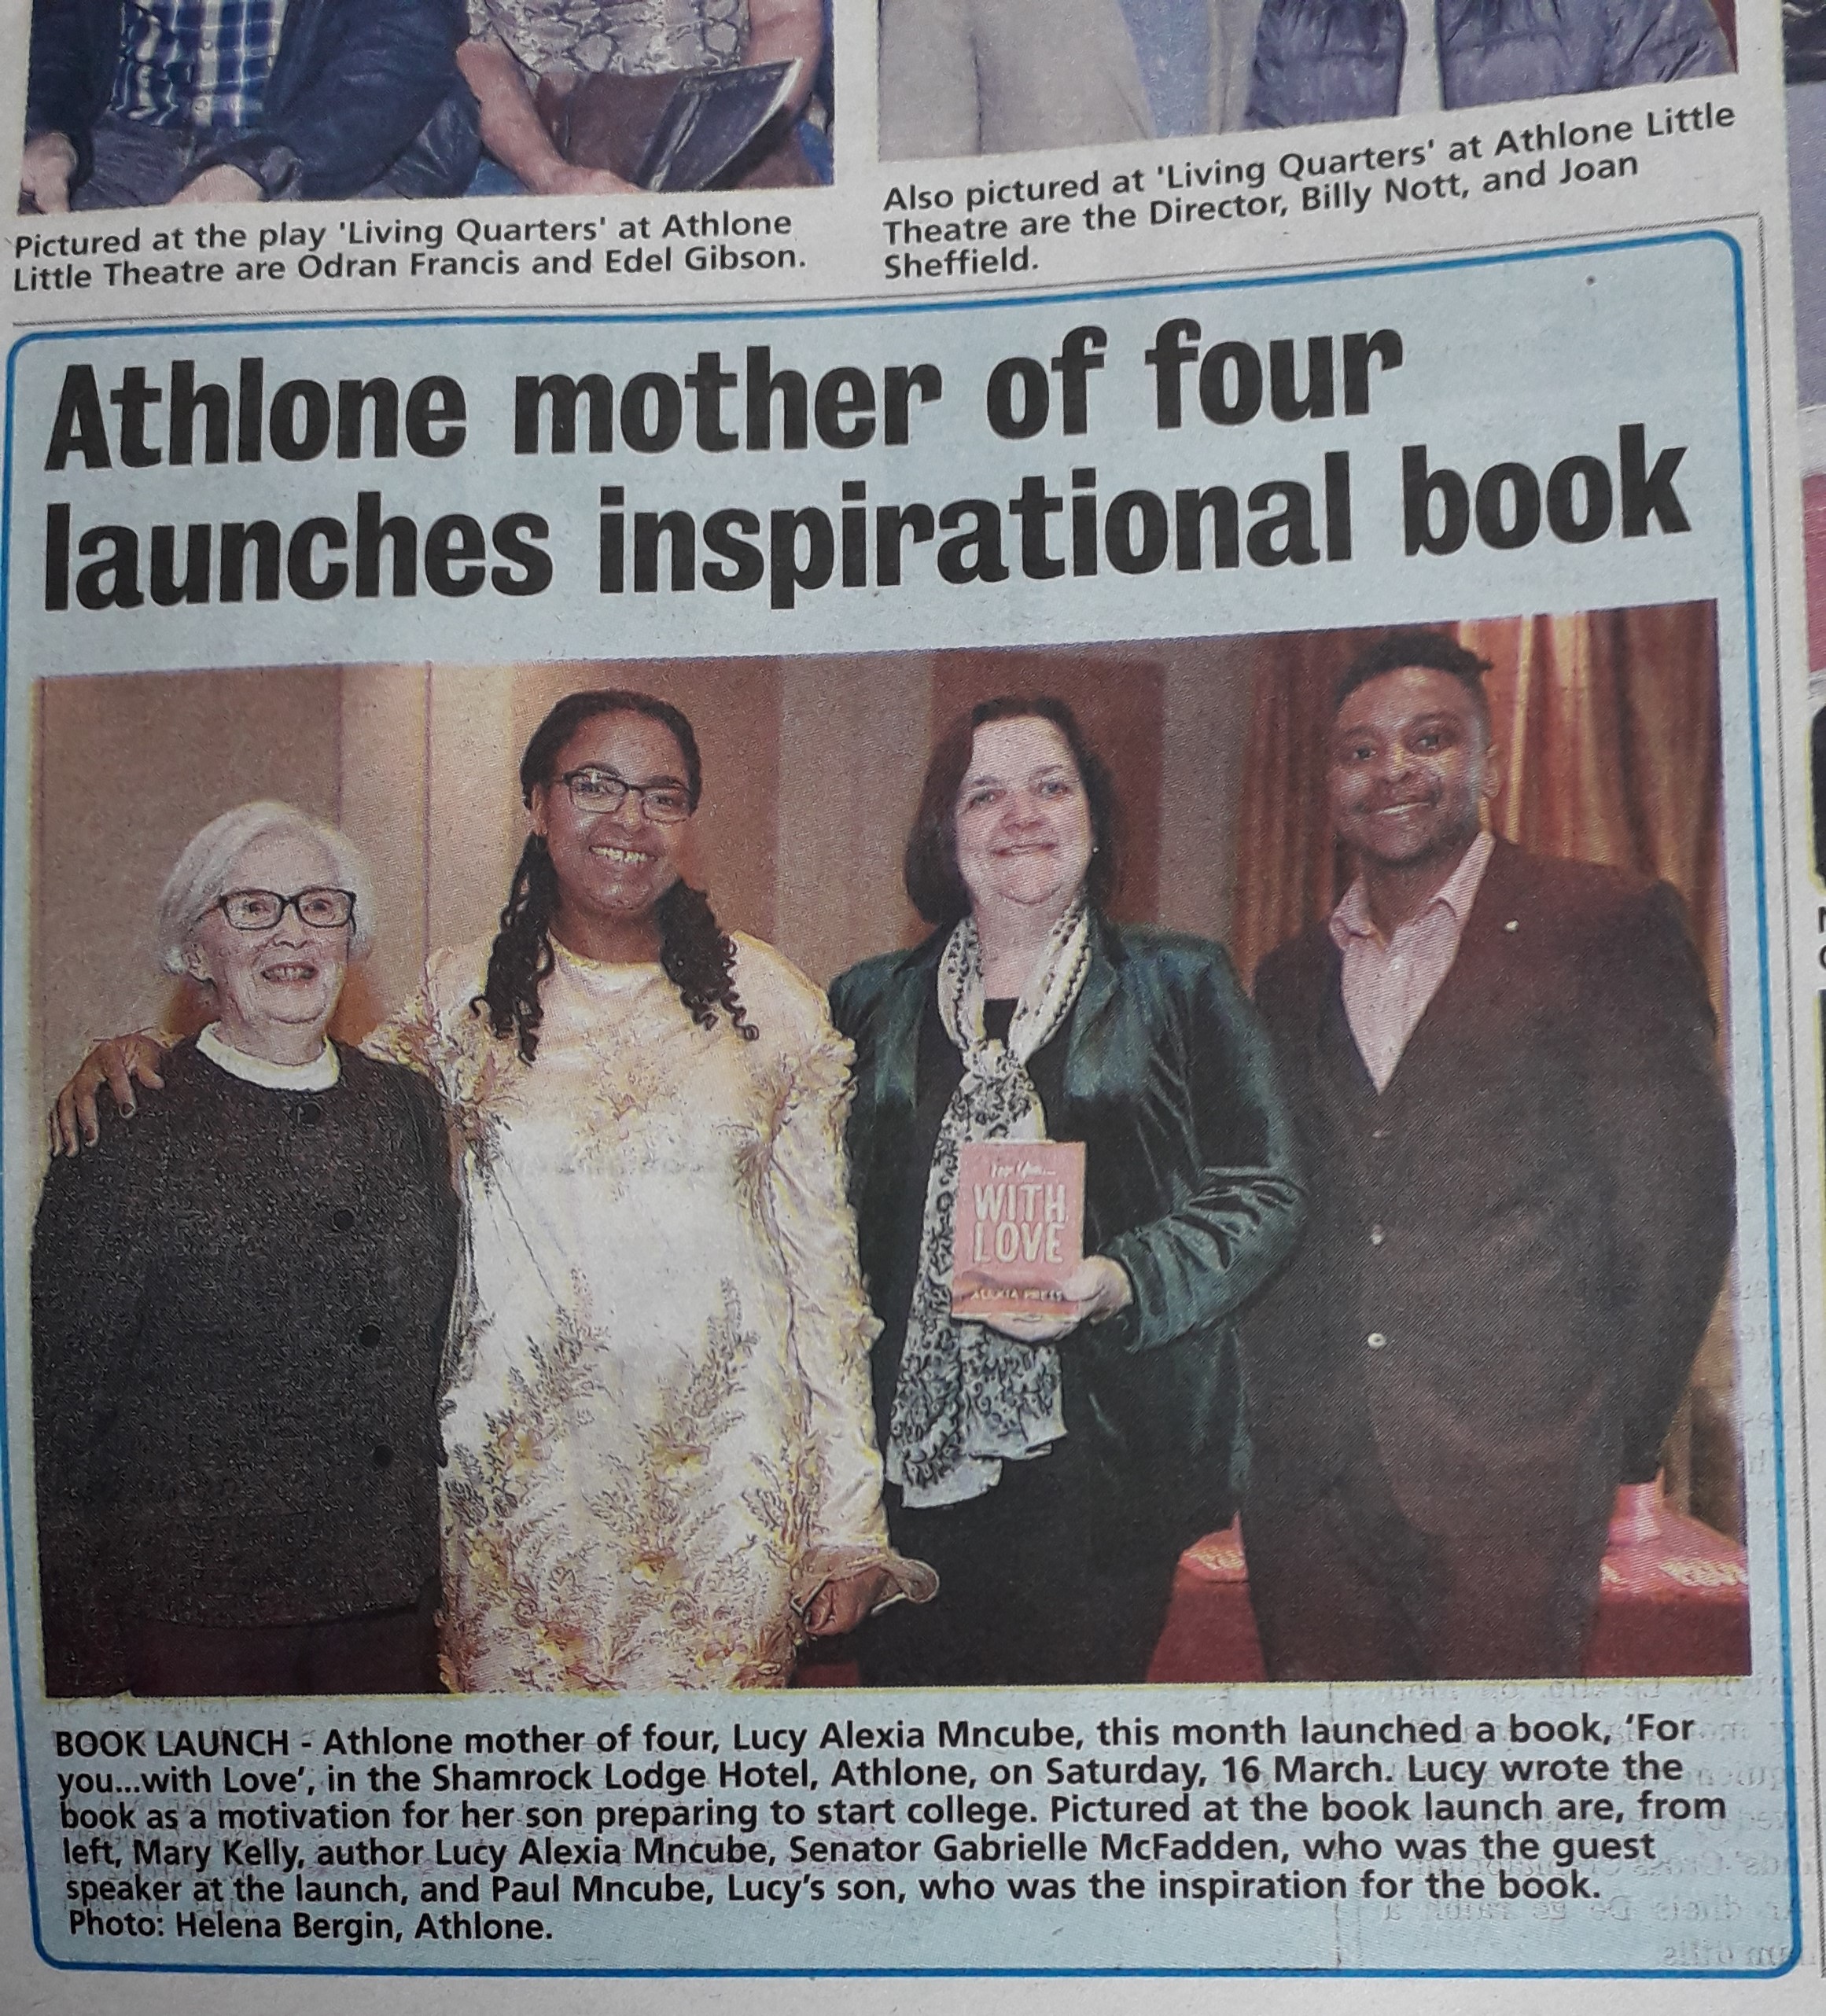 Author For You...with Love, Alexia Press attended her Book’s Launch Event in Shamrock Lodge, Ireland